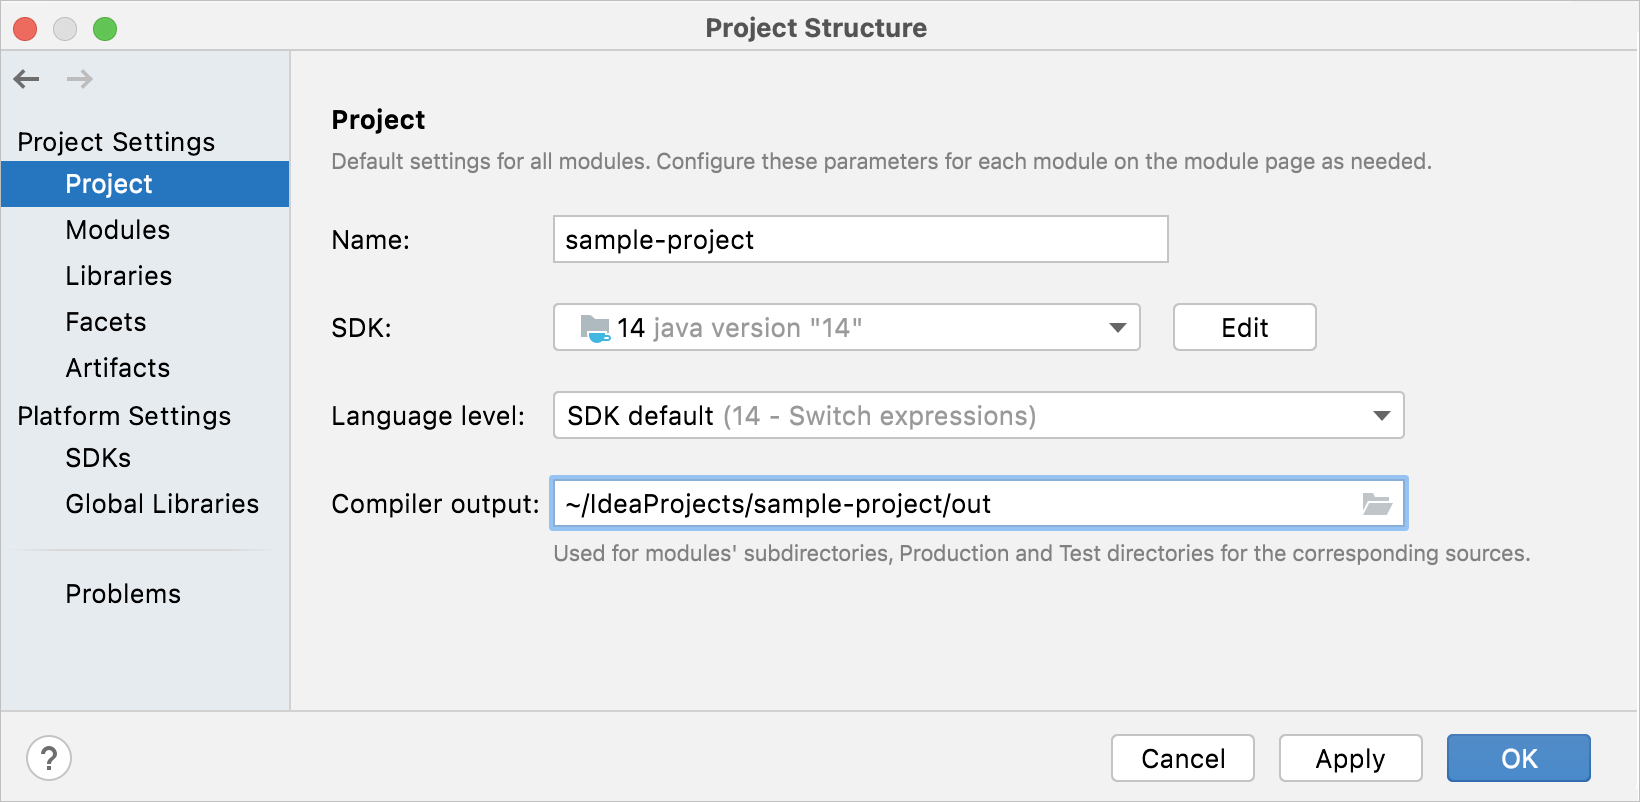 Project page of the Project Structure dialog